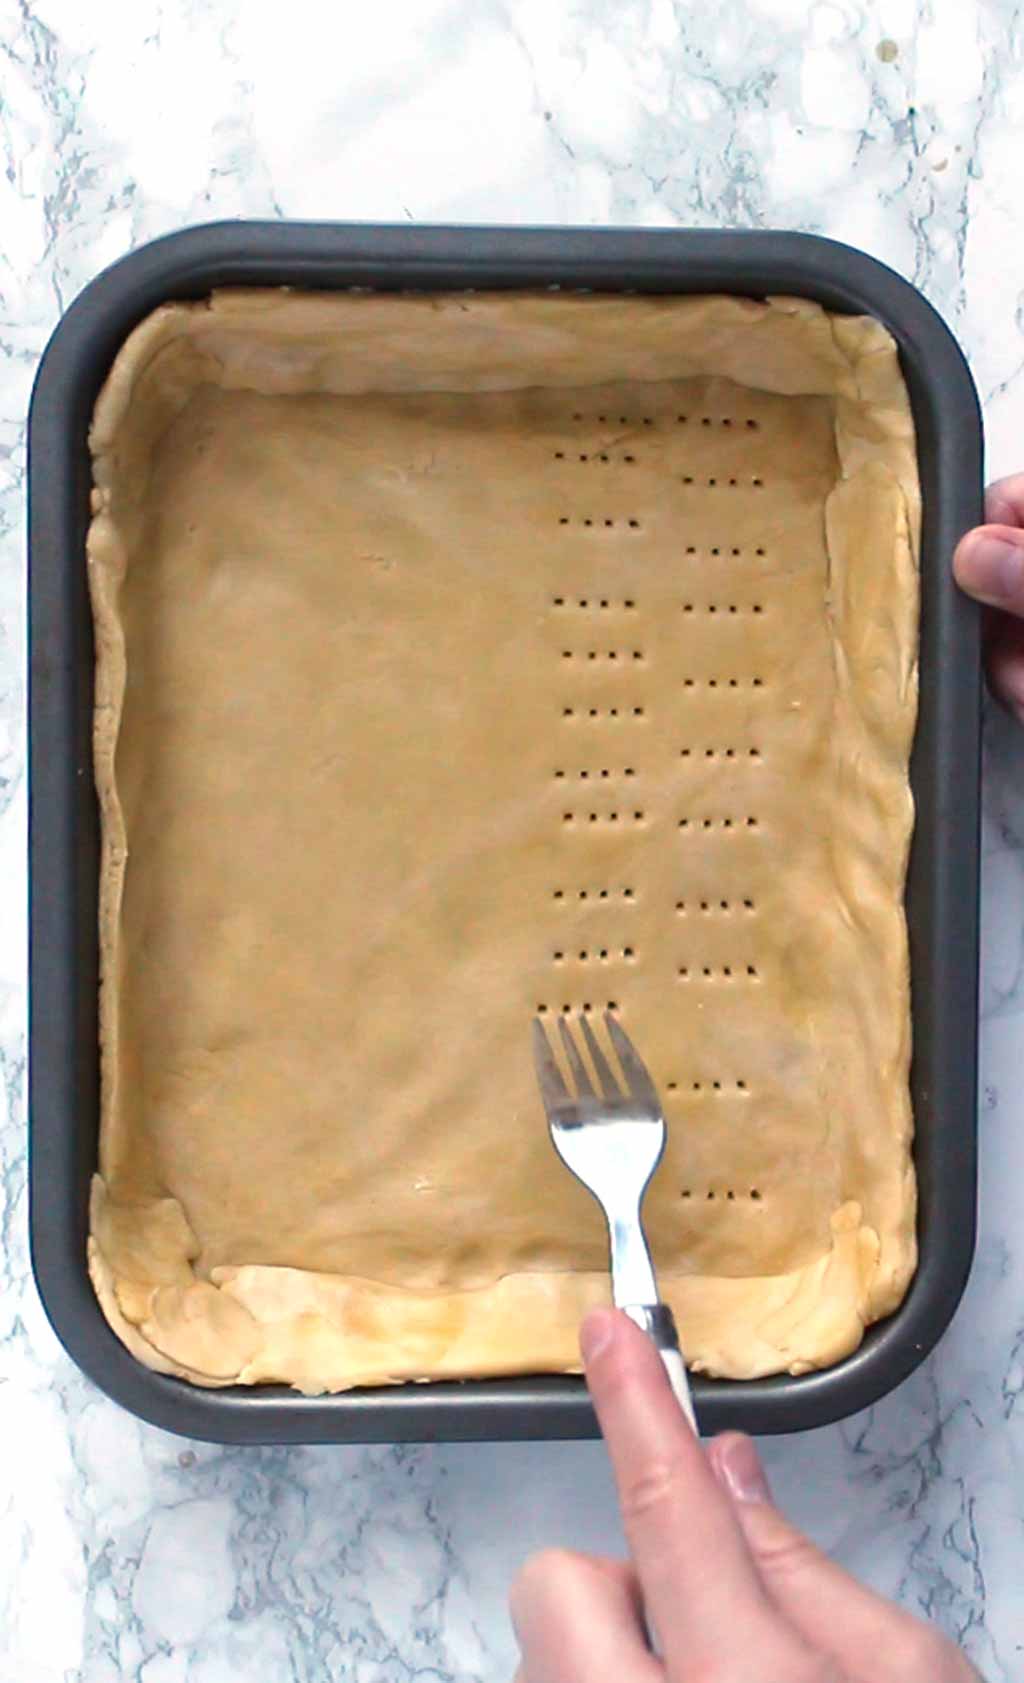 Docking the pastry with a fork